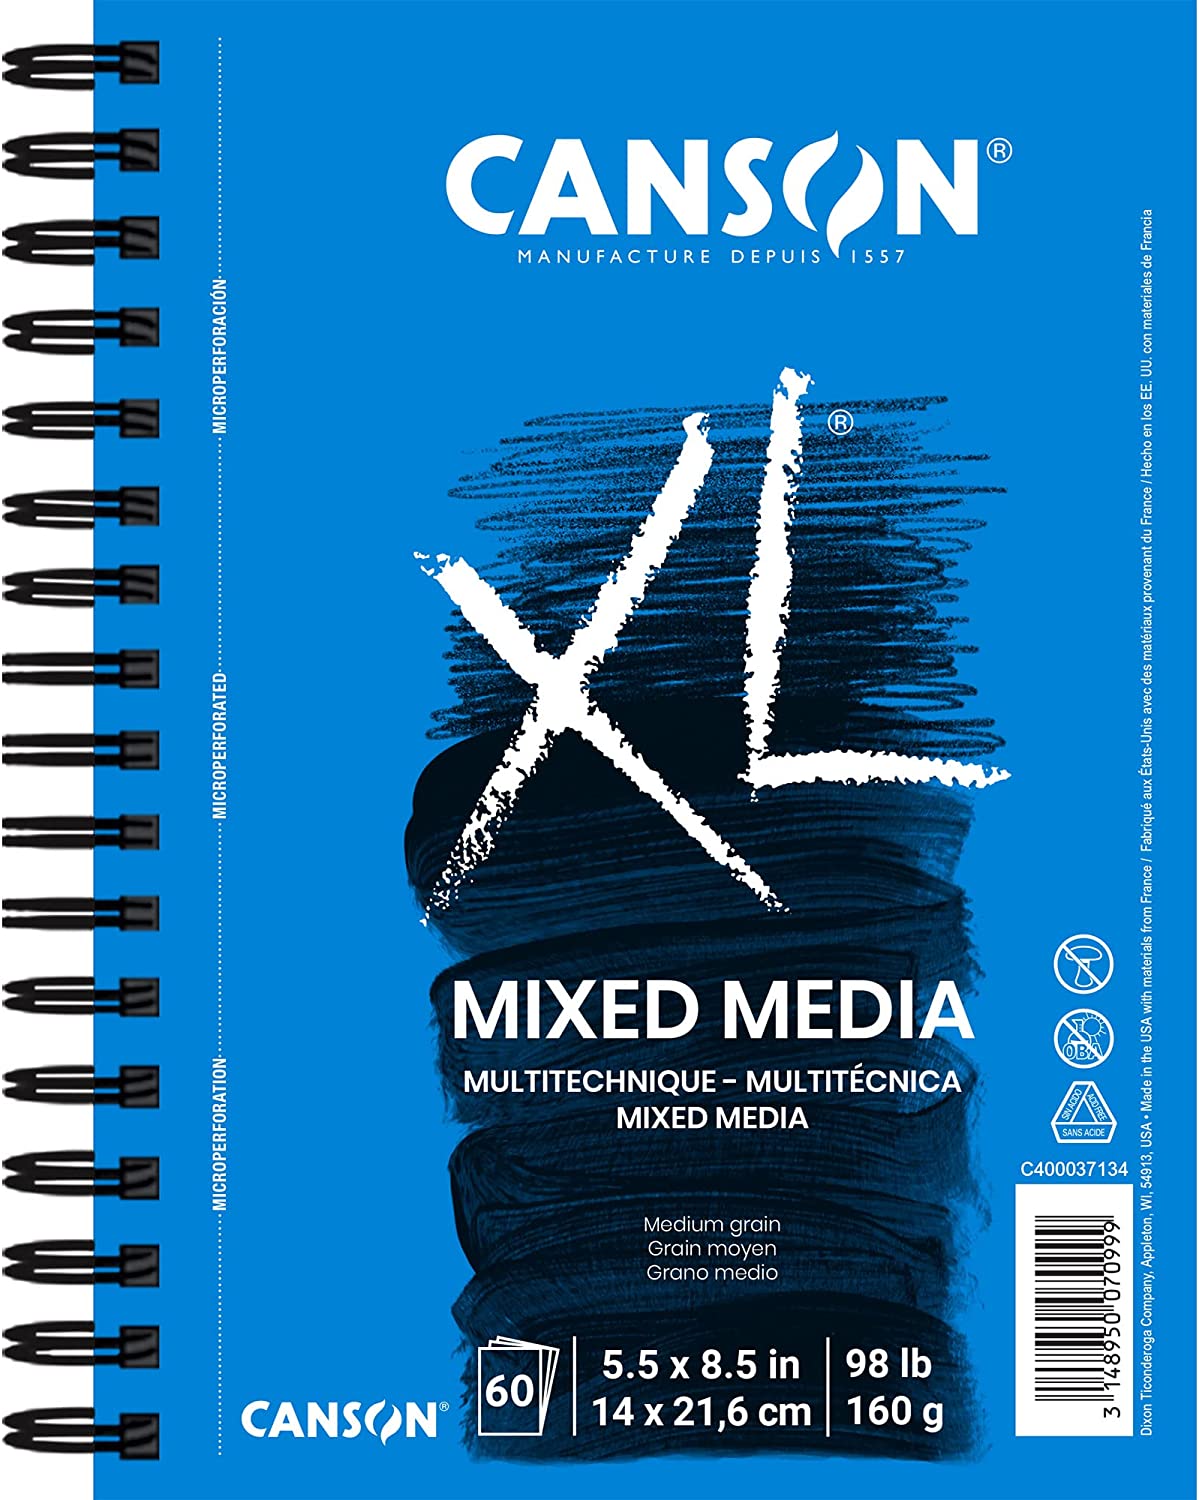 Canson XL Series Mix Paper Pad, Heavyweight, Fine Texture, Heavy Sizing for Wet or Dry Media, Side Wire Bound, 98 Pound, 5.5 x 8.5 in, 60 Sheets, 5.5″X8.5″